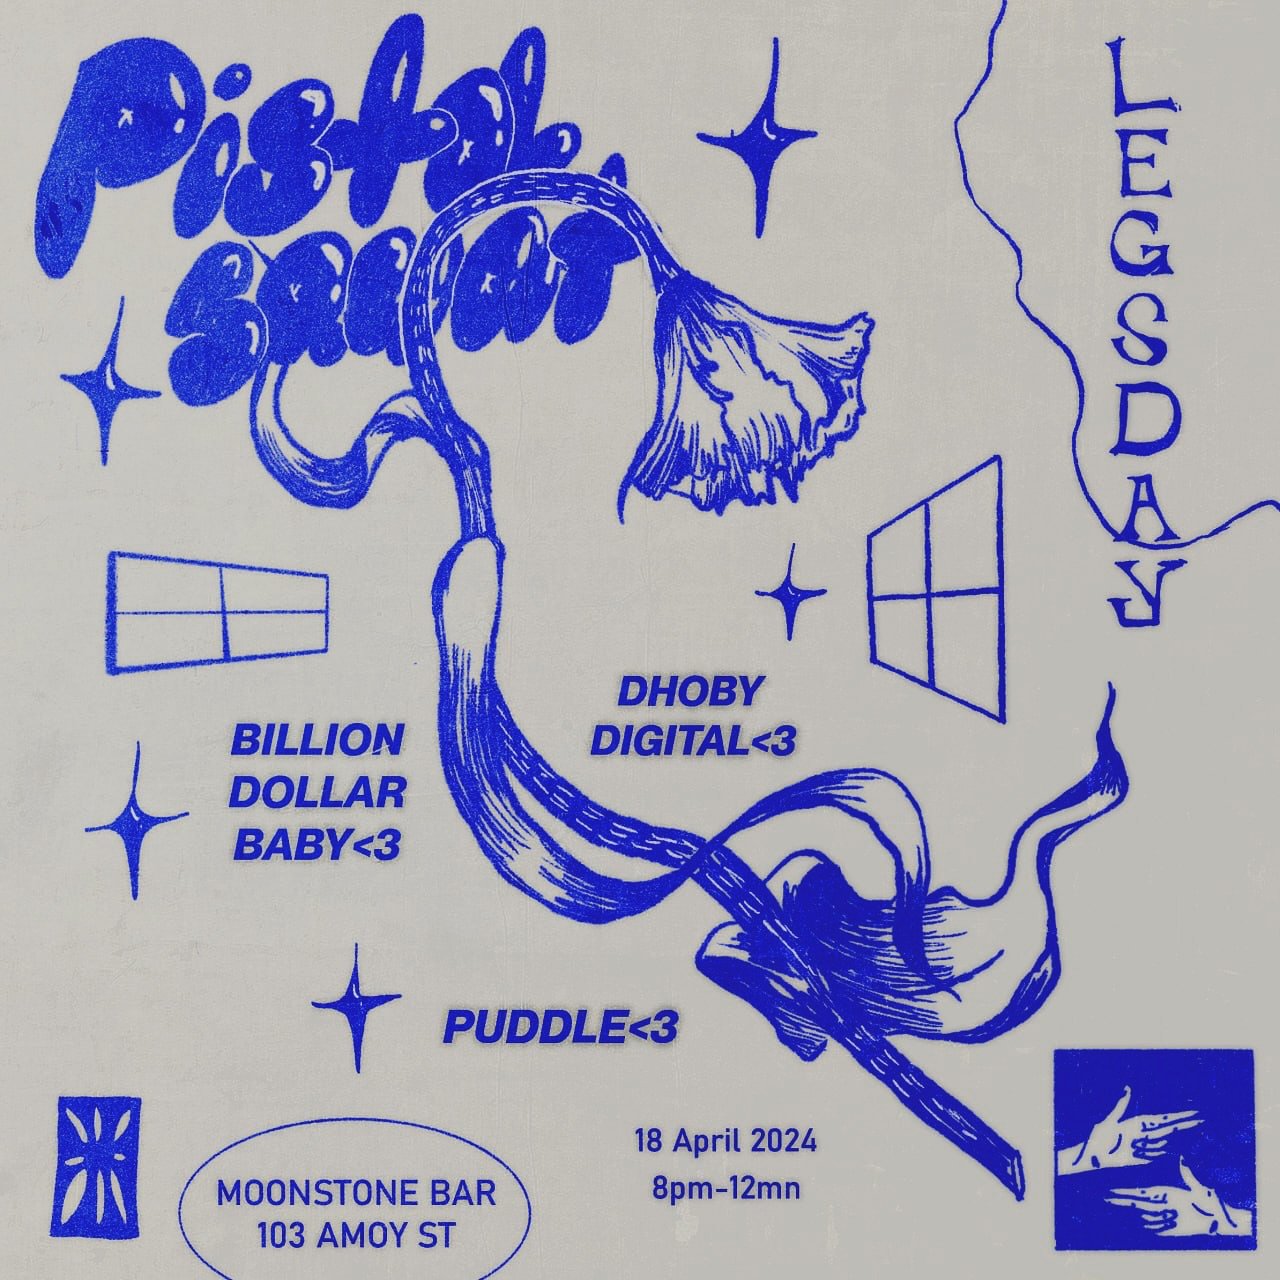 Pistol Squat!! Legs Day with Puddle, dhoby digital, and Billion Dollar Baby (aka gthb) 

Next Thursday! Come get your Legs Day workout at Moonstone! They playing breaks beats ambient bass n left field!! fk around n find out !! Chyeah!!

Artwork by : 